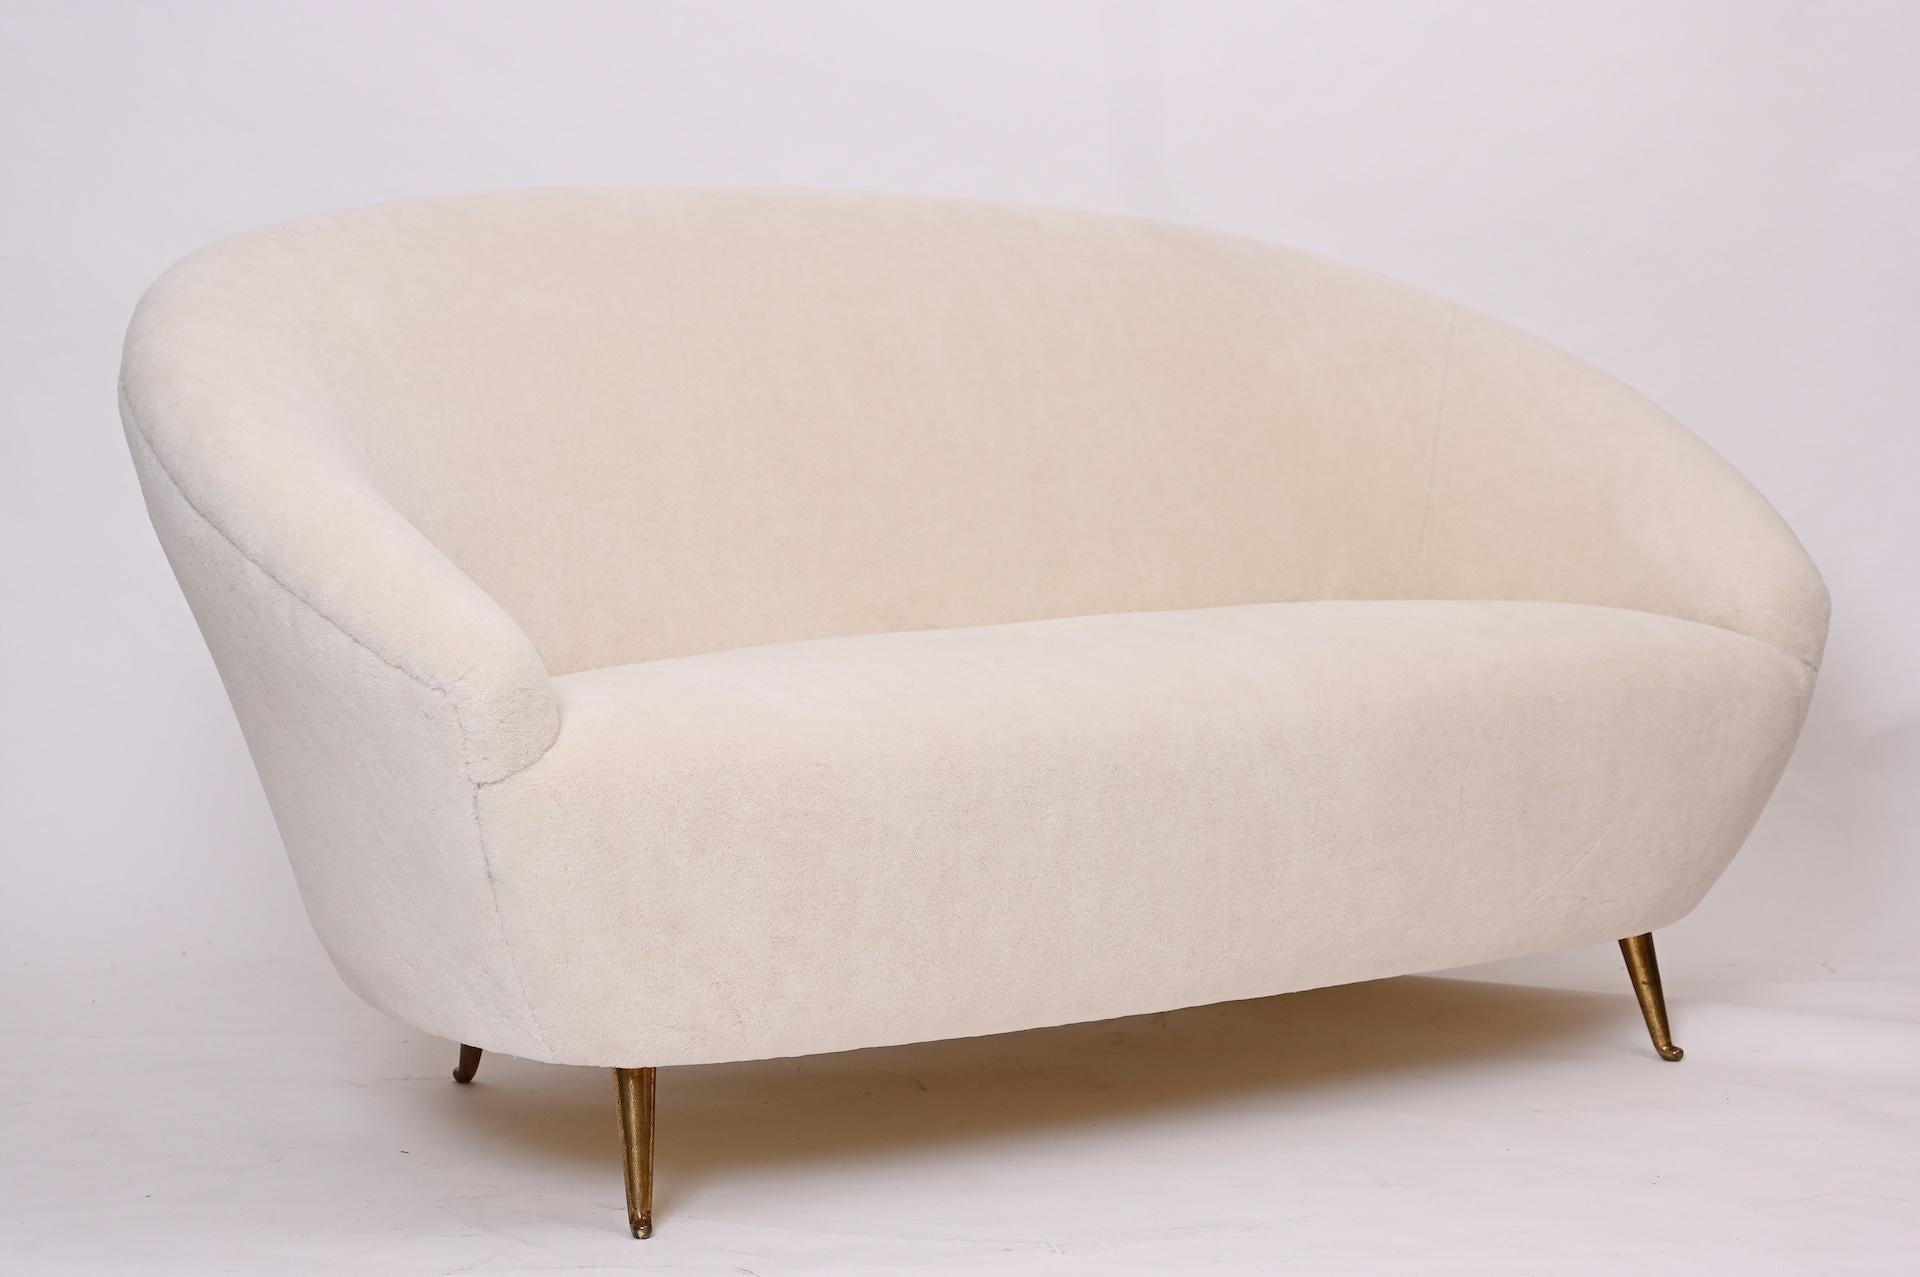 Original 1950s curved sofa by Isa Bergamo from 1950s, Italy.
Style of Ico Parisi or Munari. Similar to Gio Ponti ISA sofas.

 Re upholstered in an off-white/cream alpaca wool teddy velvet... 

Lovely proportions. And very comfortable!